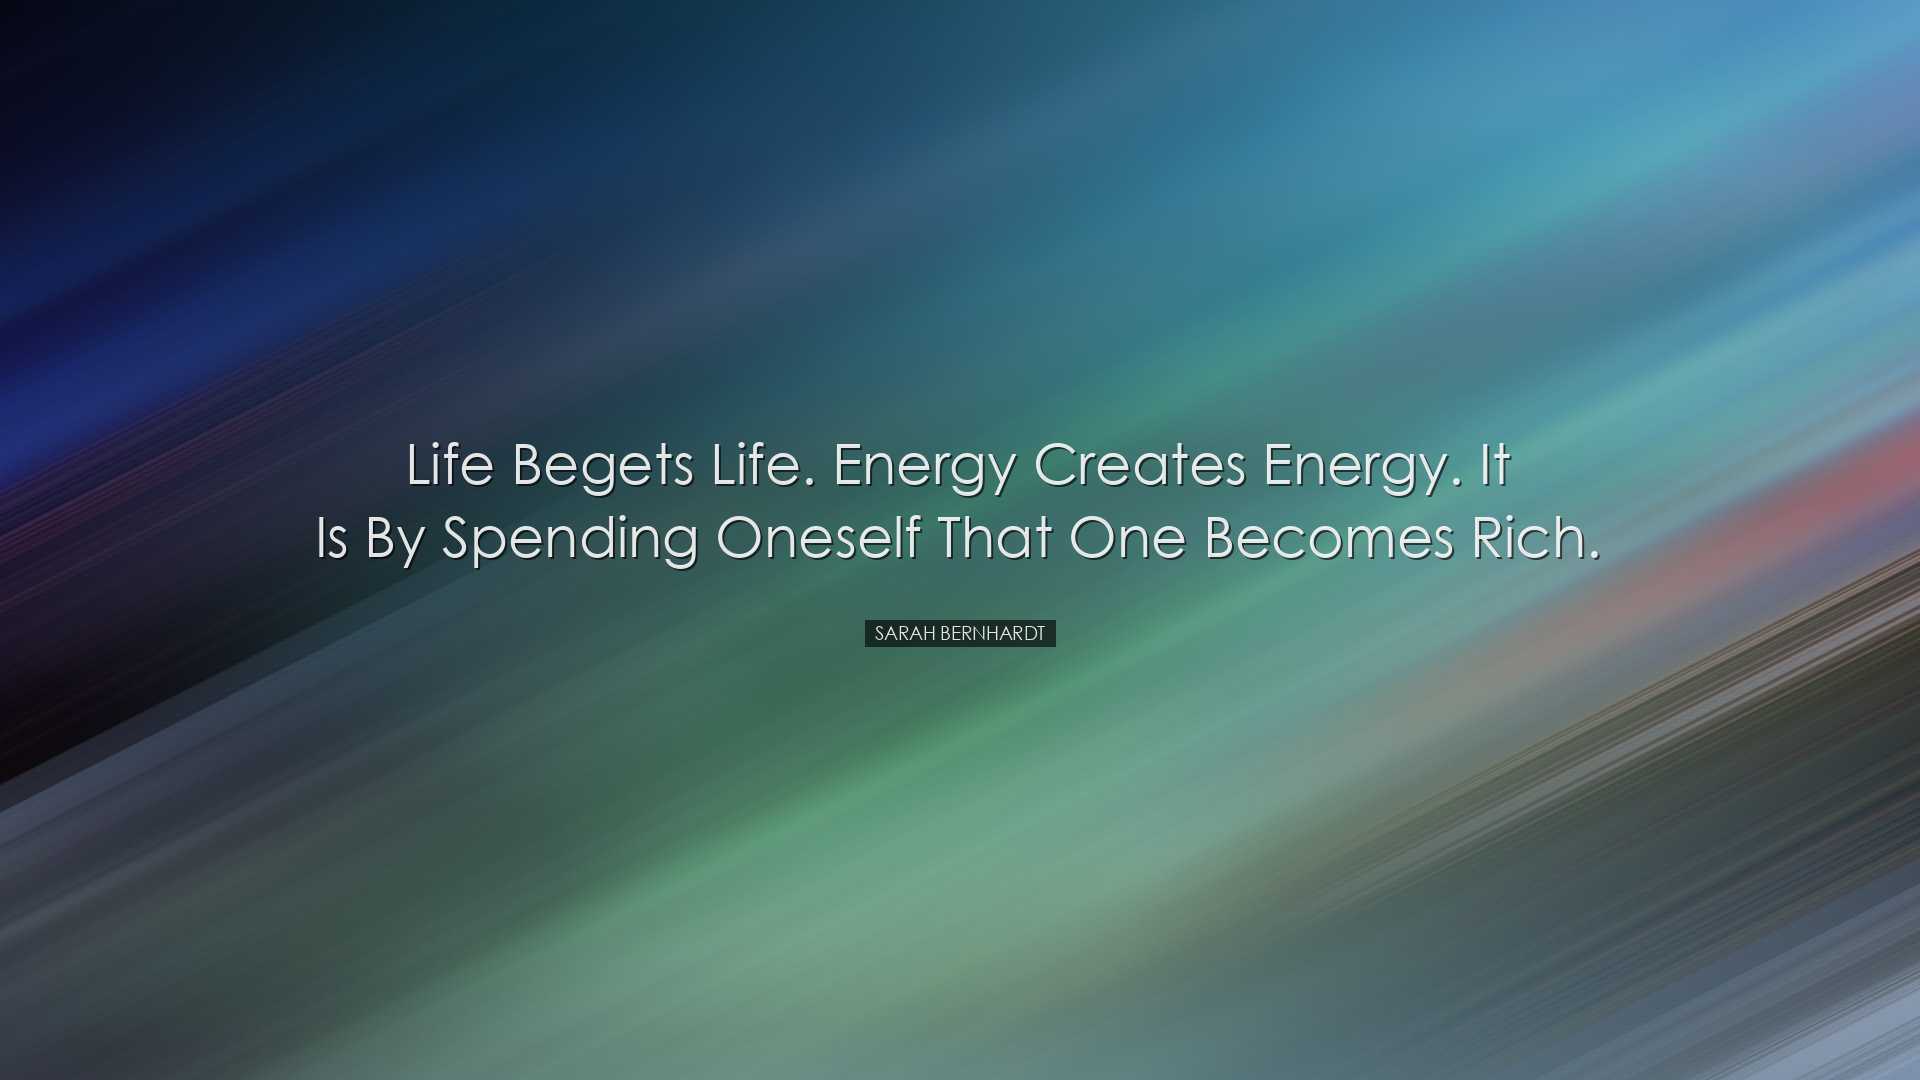 Life begets life. Energy creates energy. It is by spending oneself